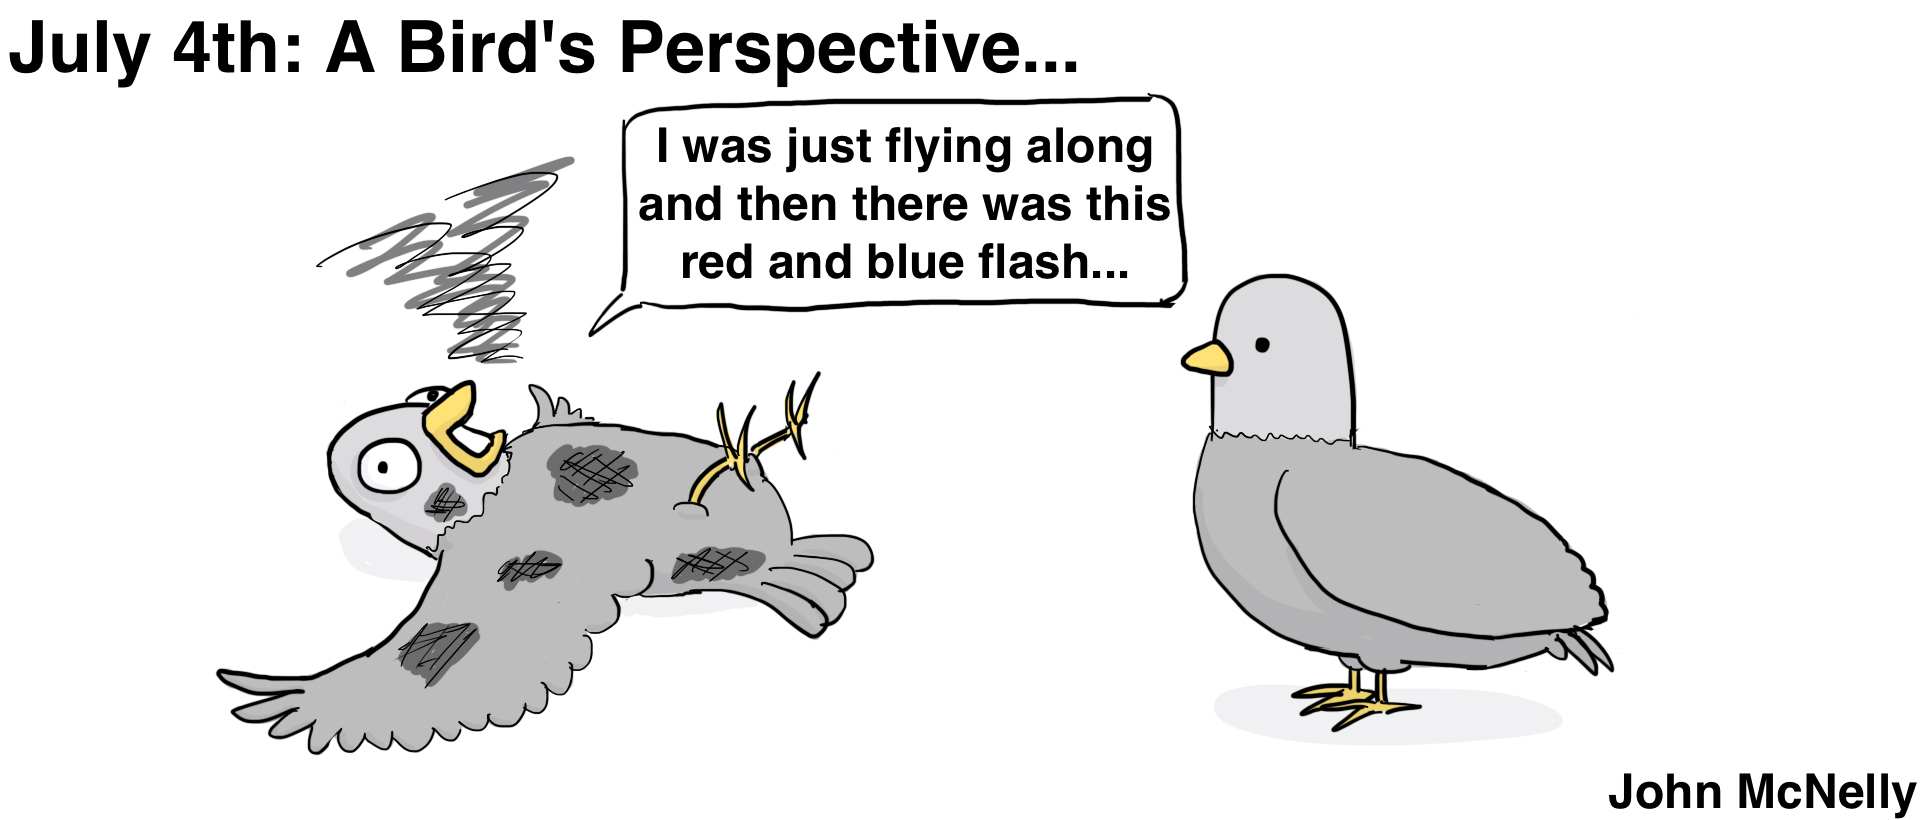 July 4th Bird's Perspective